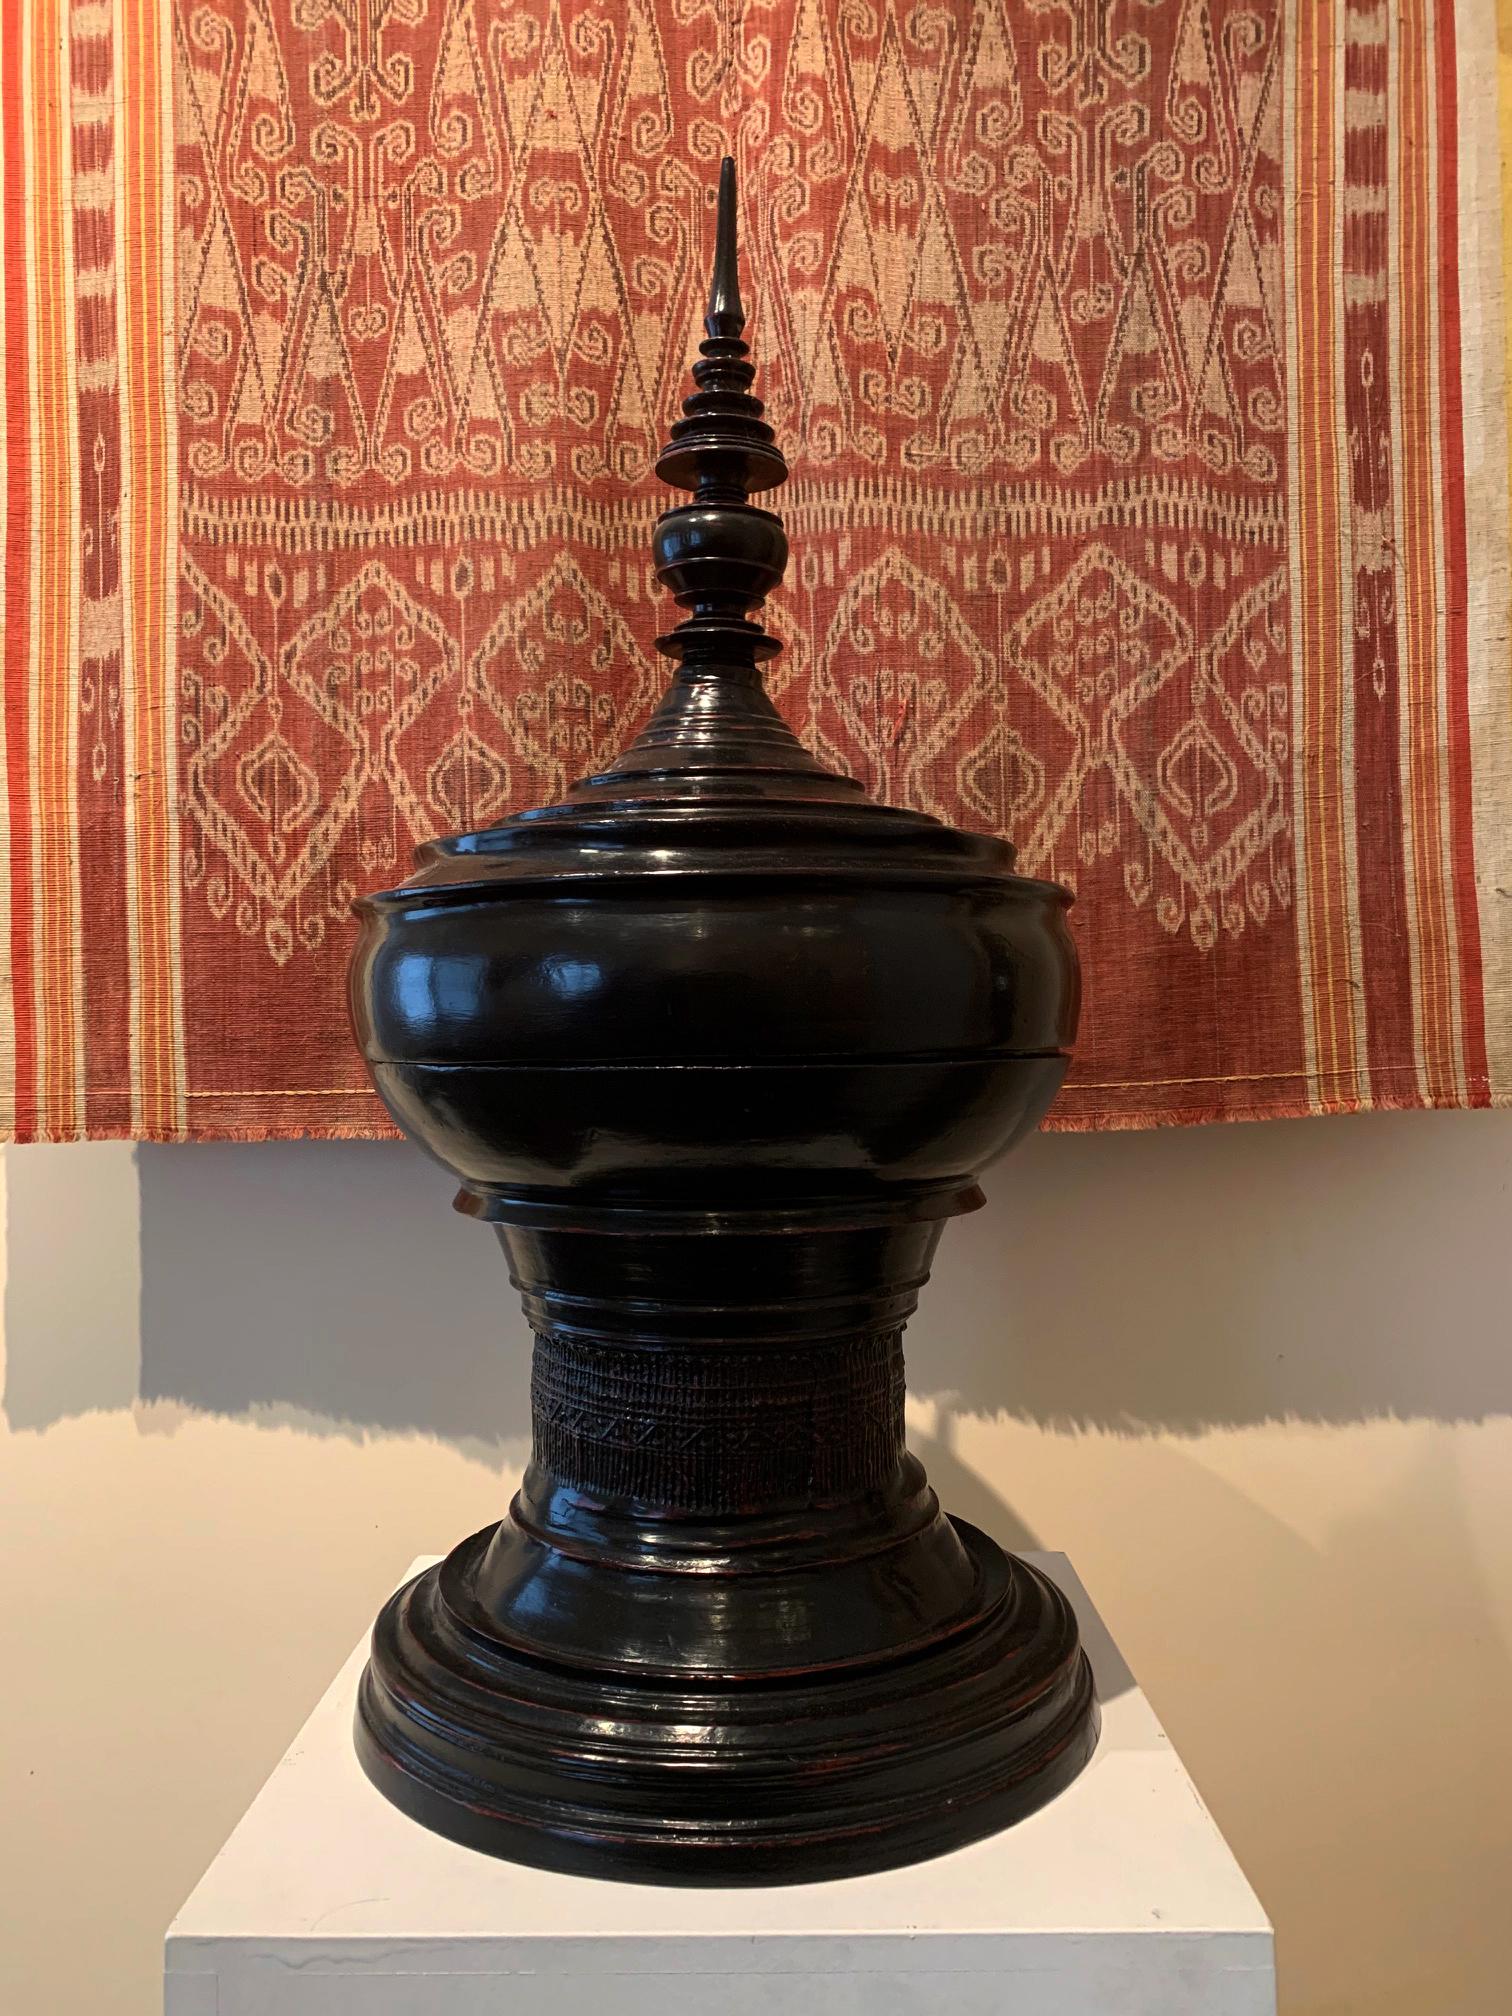 A Southeast Asian lacquer vessel of iconic form from Burma or Norther Thailand, circa turn of the 20th century. This covered vessel is called a “Hsun Ok” and was made in the form of the large stupa of the Buddhist temple. They are owned used for